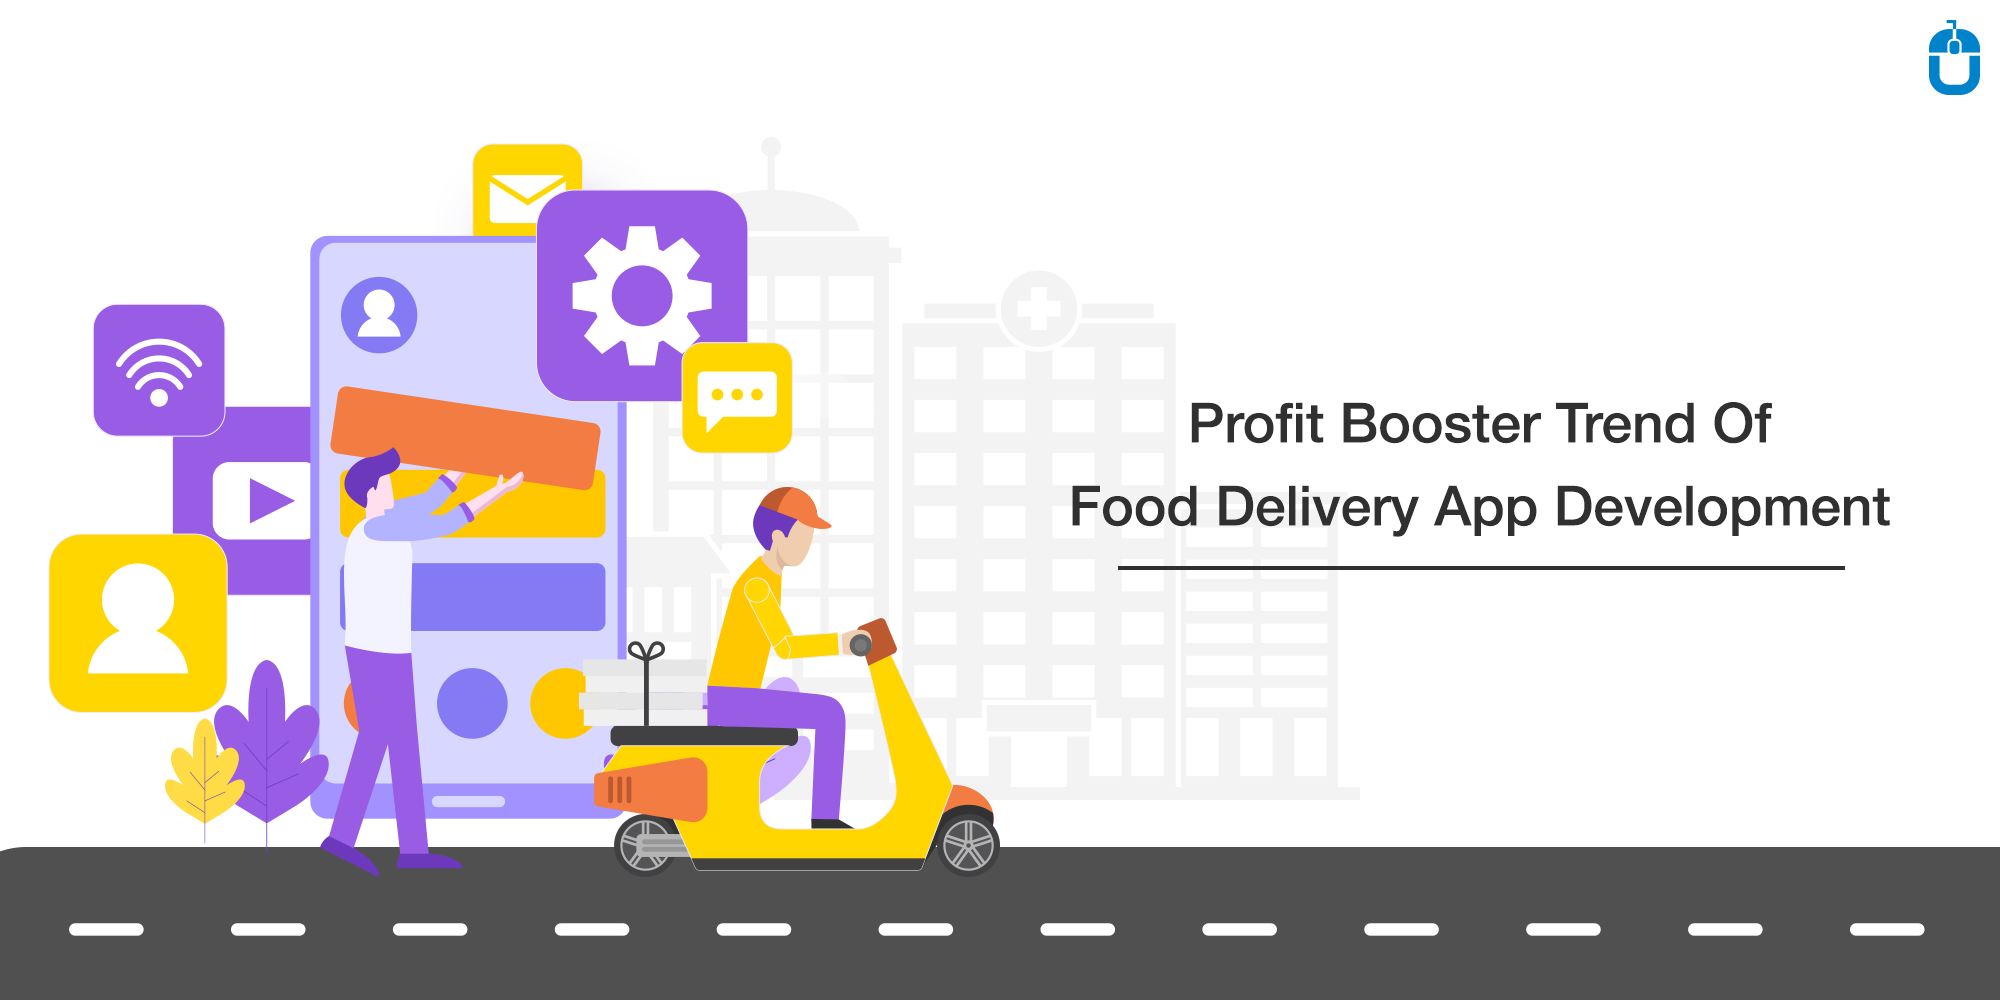 Profit Booster Trend Of Food Delivery App Development